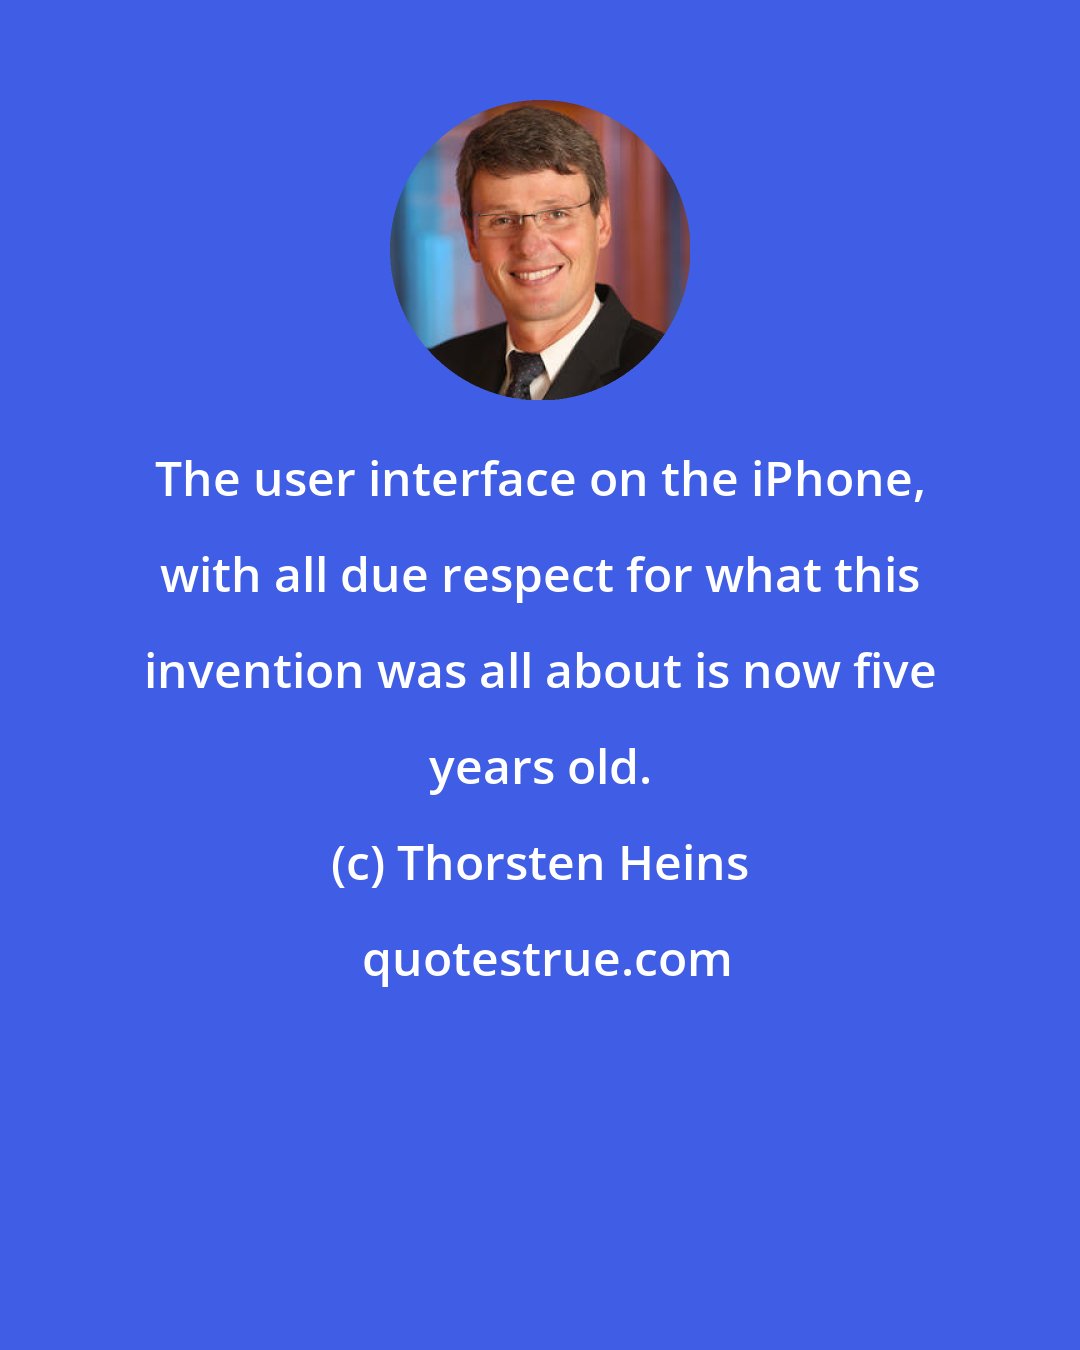 Thorsten Heins: The user interface on the iPhone, with all due respect for what this invention was all about is now five years old.